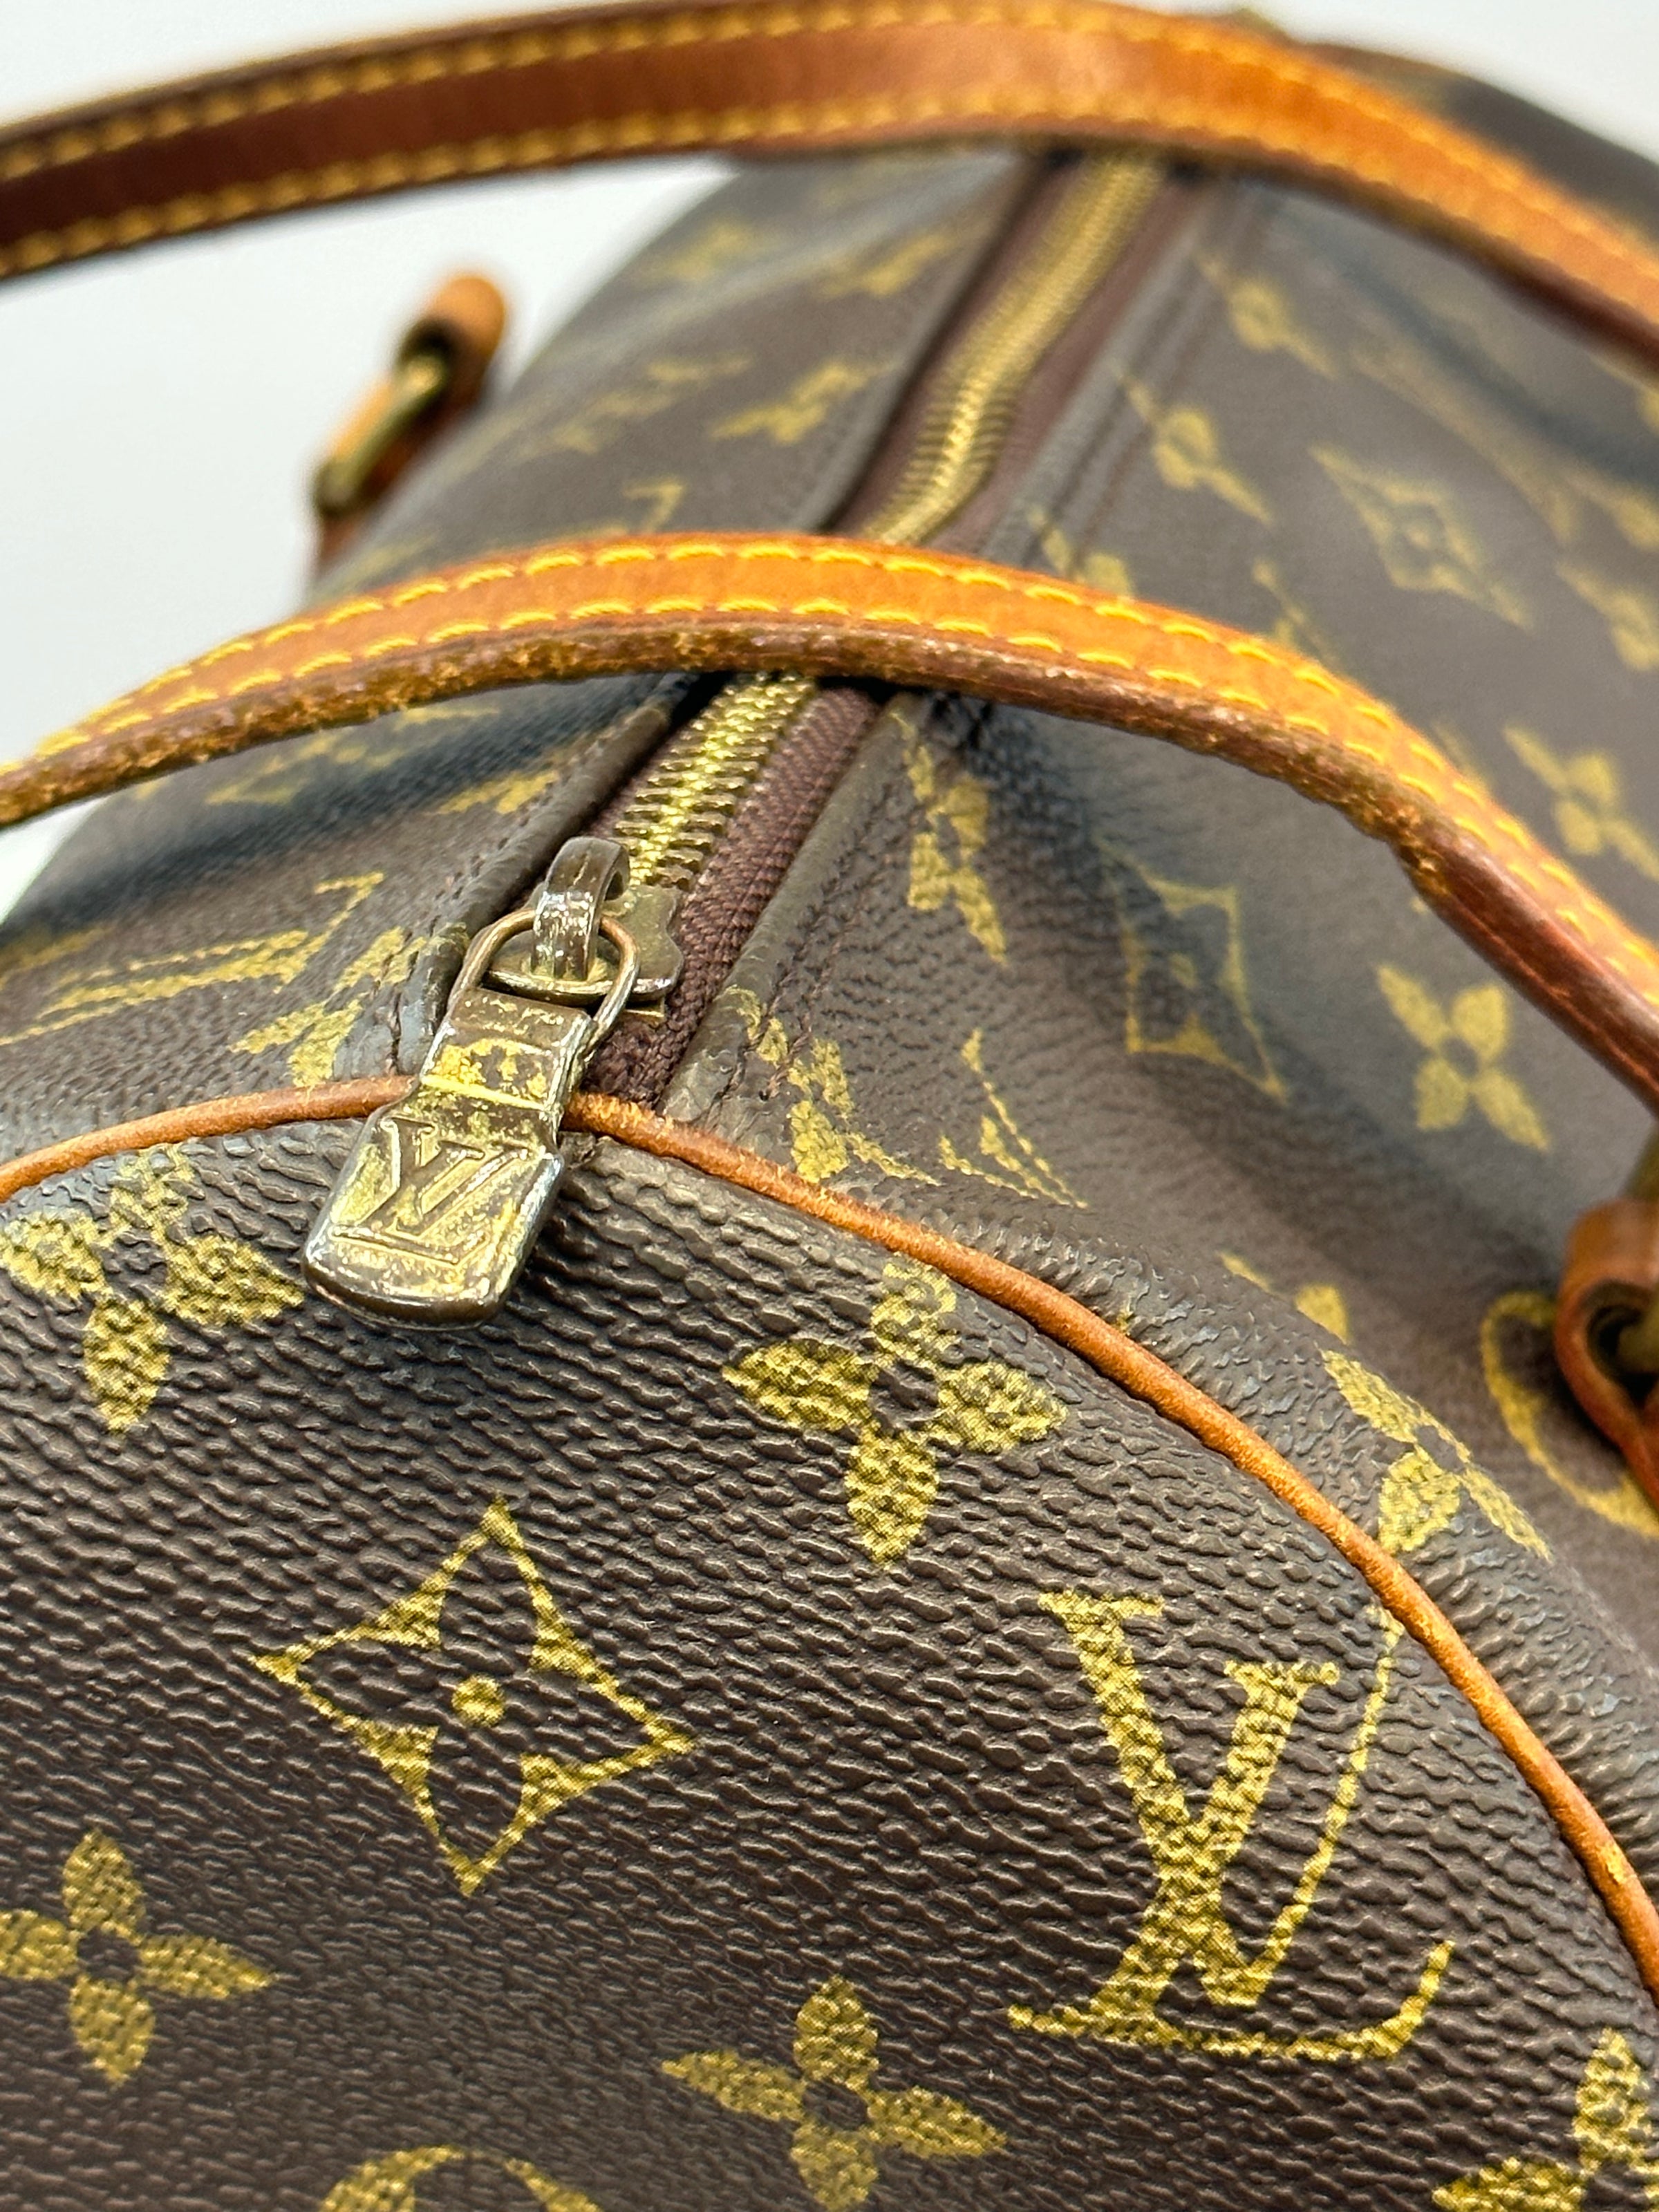 Louis Vuitton Hunting Bag – Elite HNW - High End Watches, Jewellery & Art  Boutique